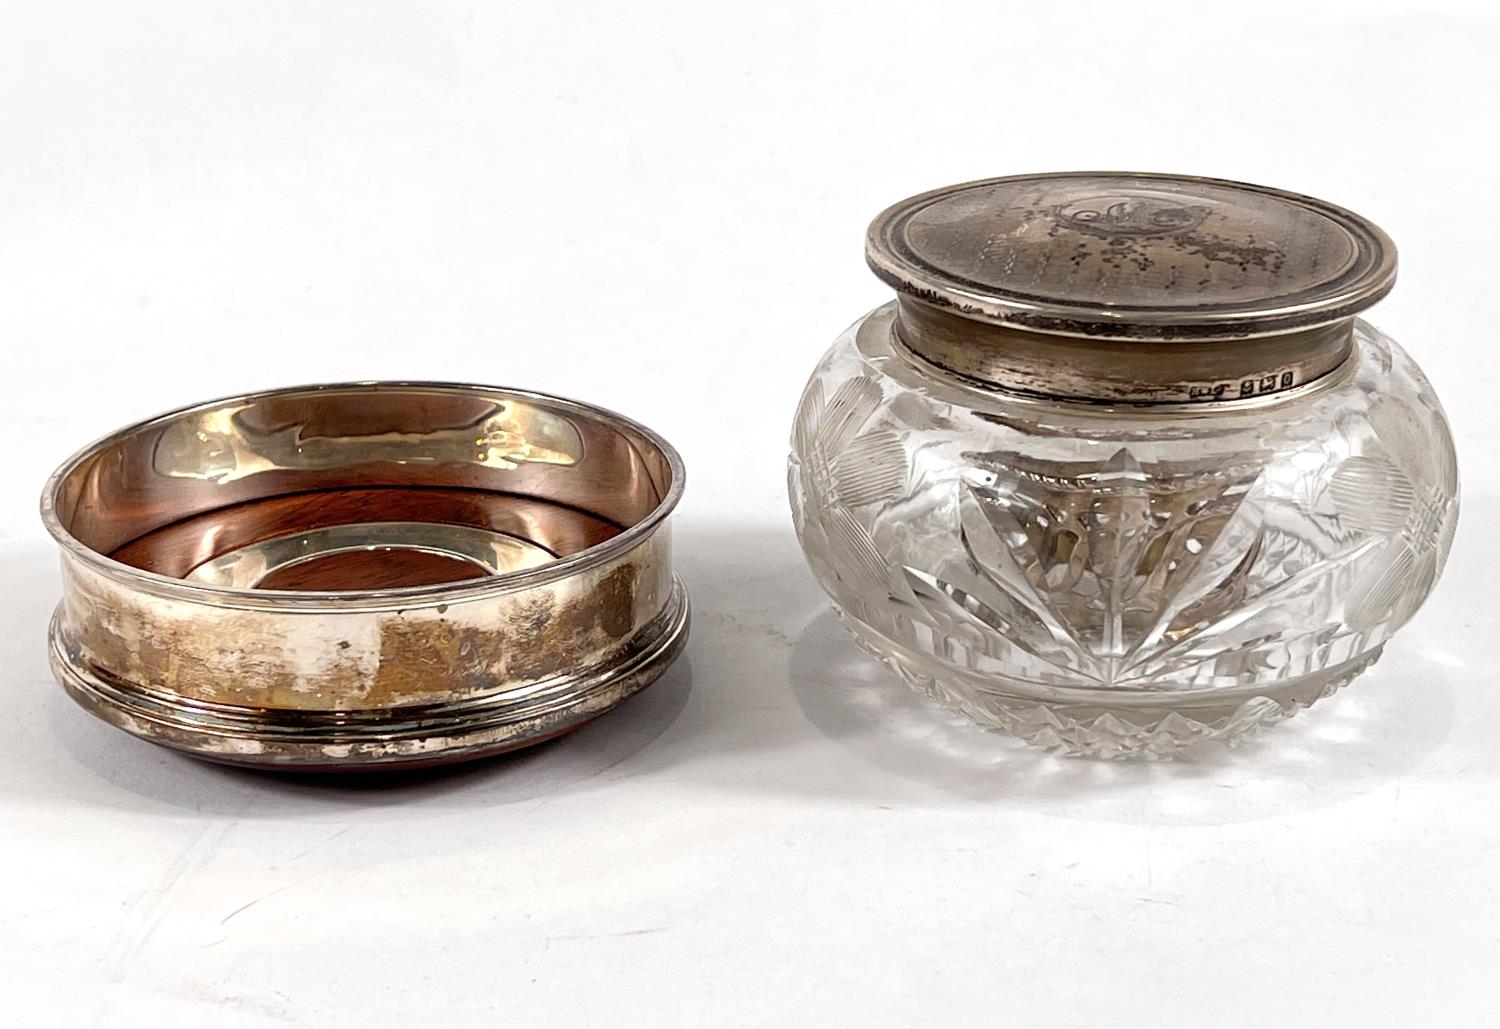 A hallmarked silver coaster by Cars, a silver lidded cut glass trinket jar and a napkin ring